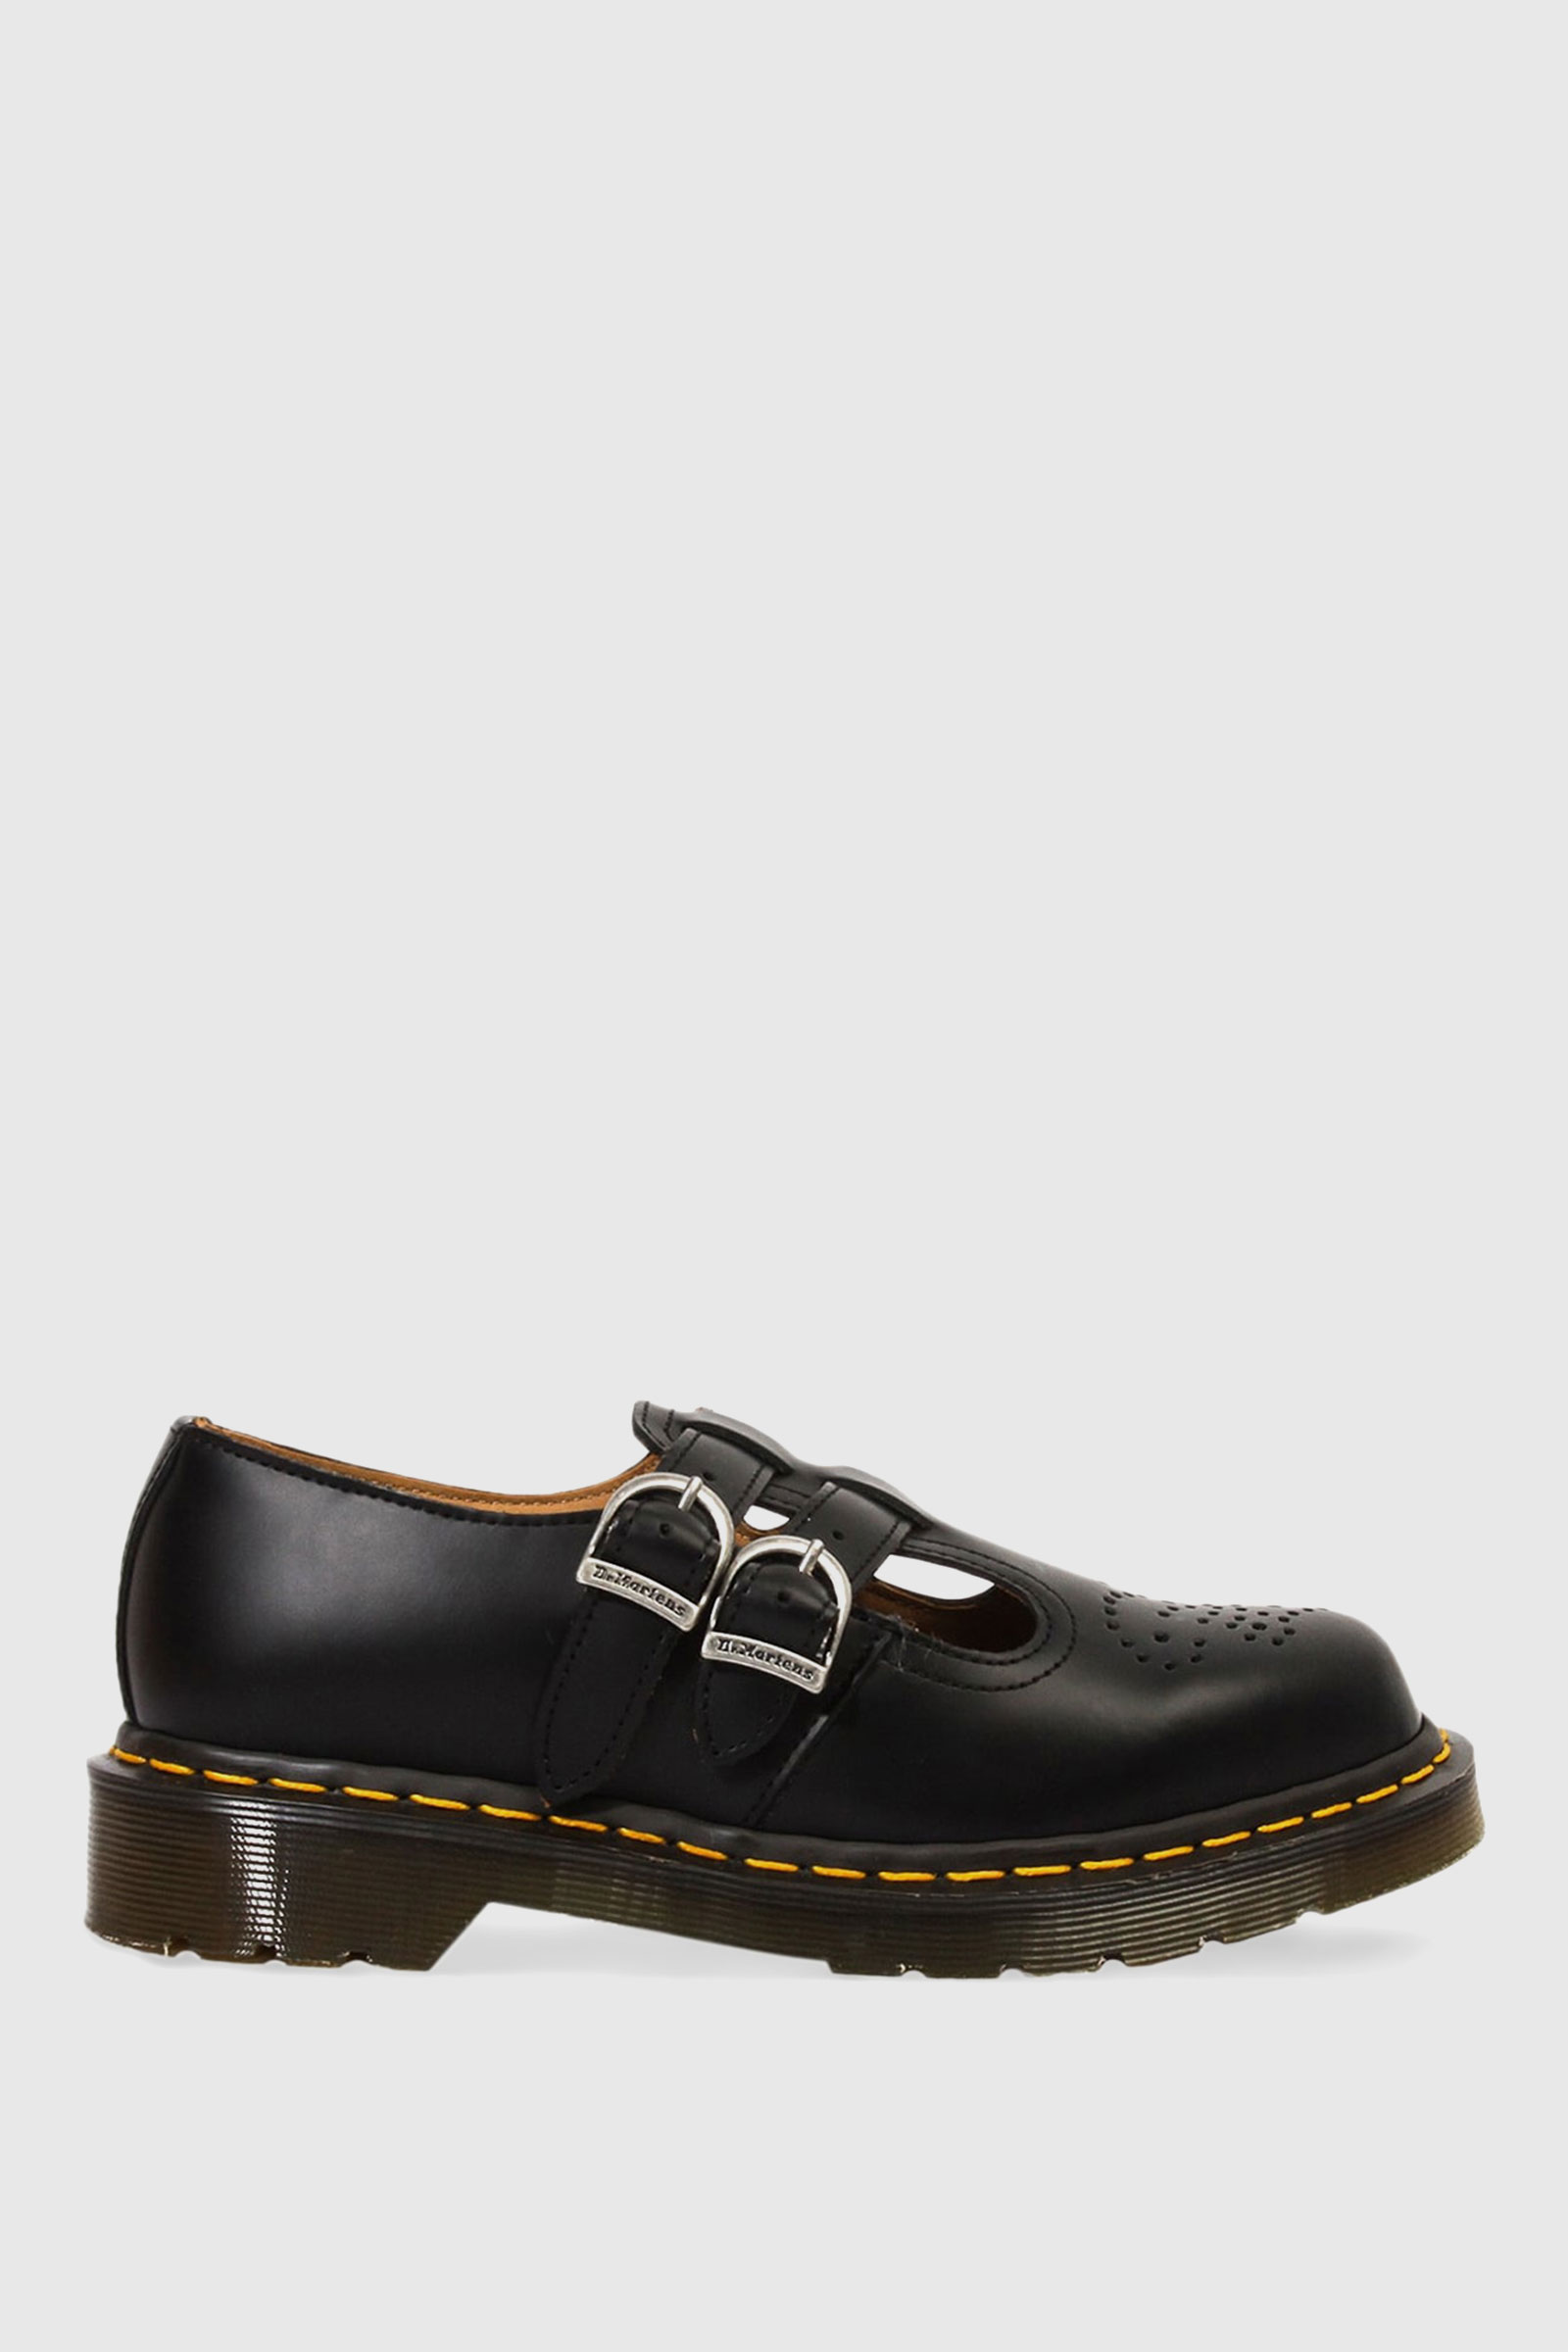 dr martens smooth leather